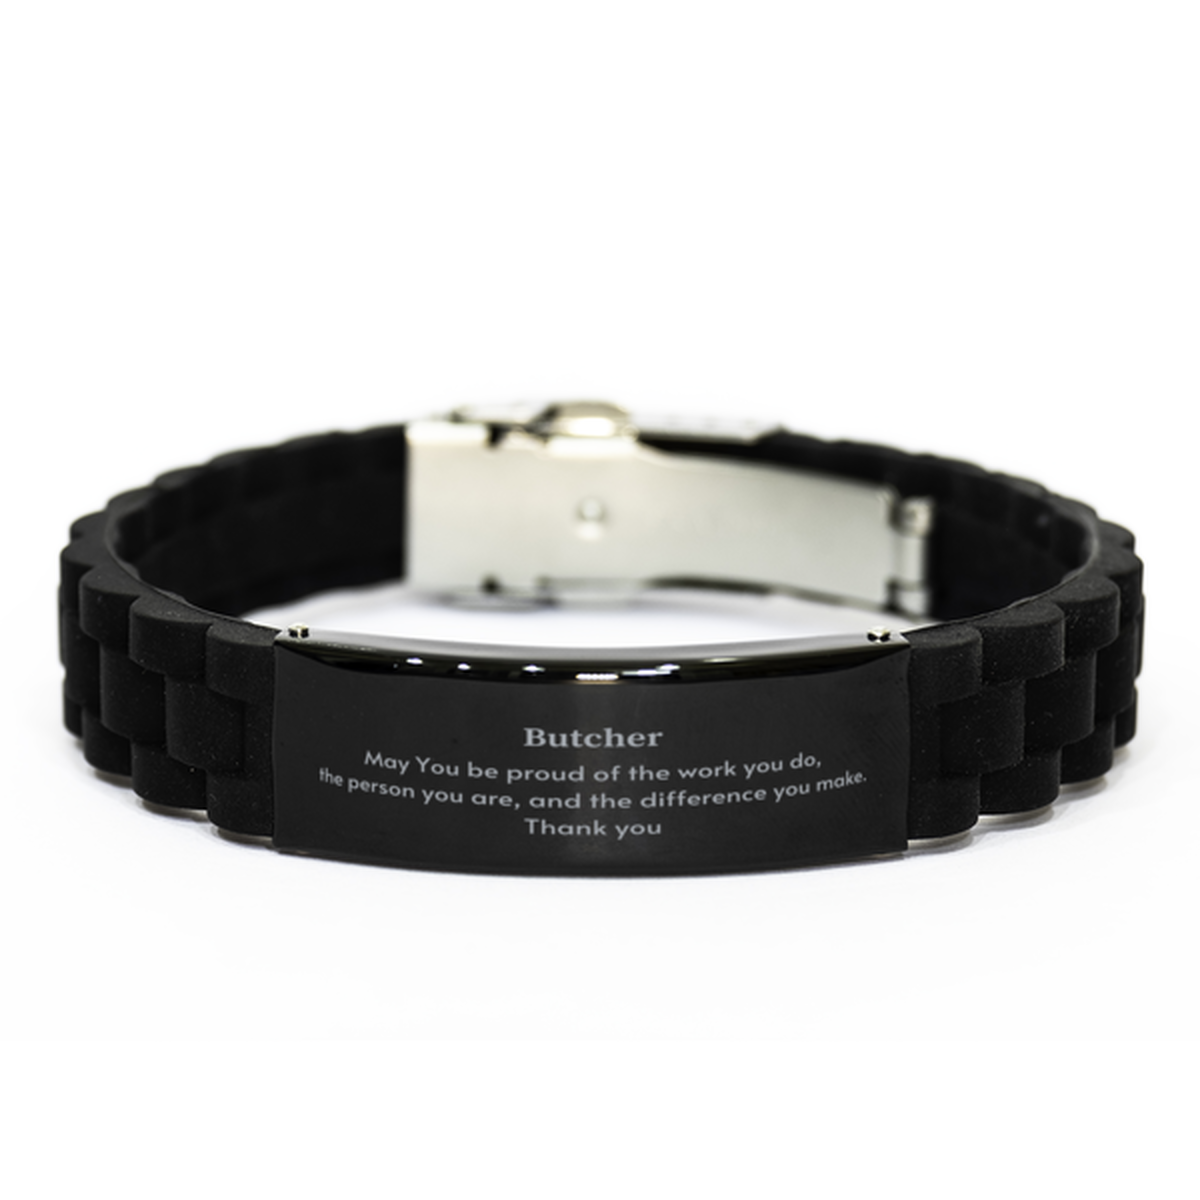 Heartwarming Black Glidelock Clasp Bracelet Retirement Coworkers Gifts for Butcher, Butcher May You be proud of the work you do, the person you are Gifts for Boss Men Women Friends